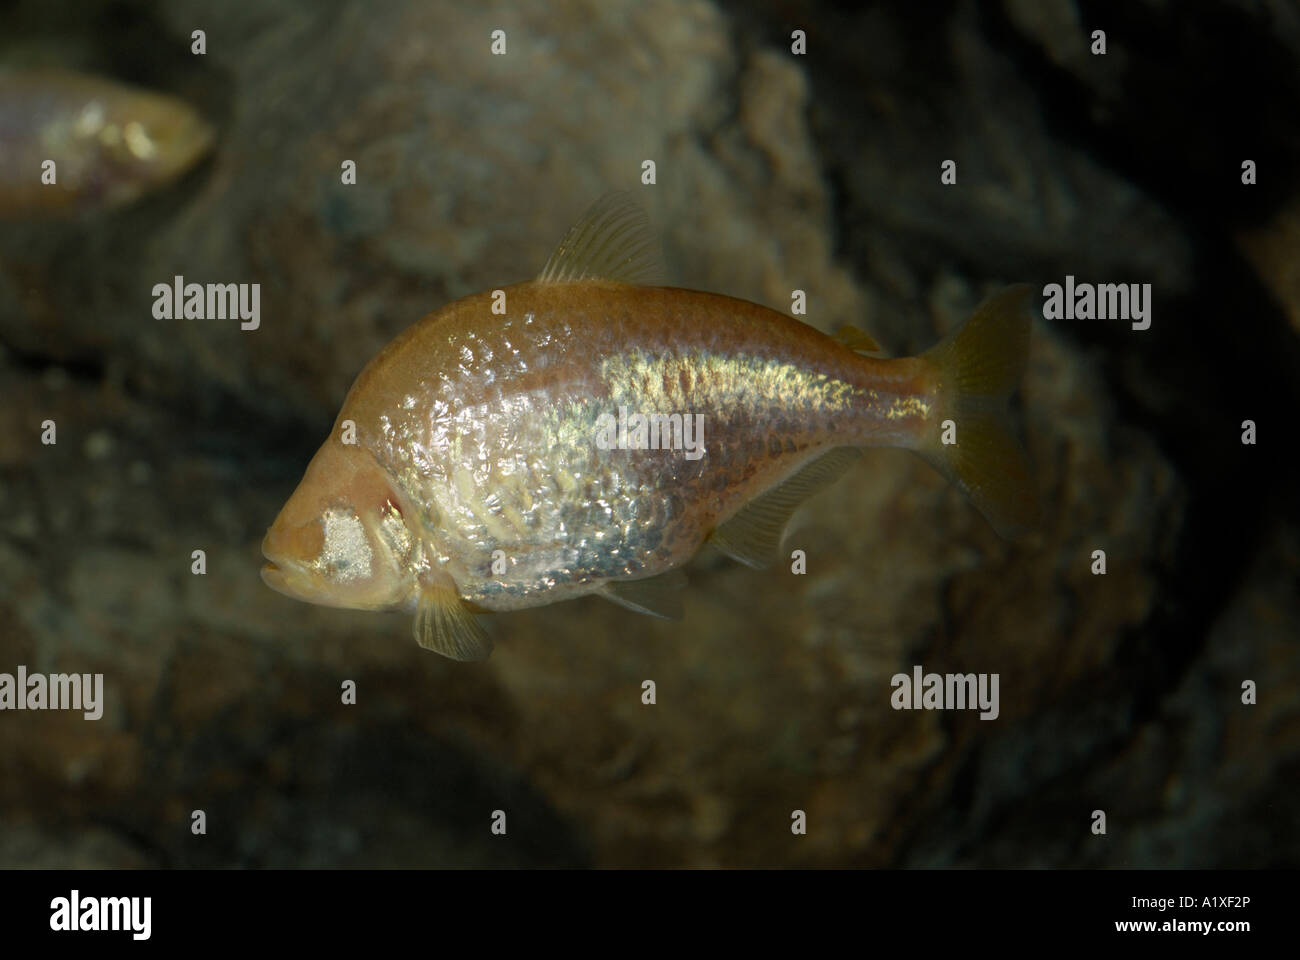 Blinde Höhle Fisch, Astyanax Mexicanus oder Astyanax characidae Stockfoto